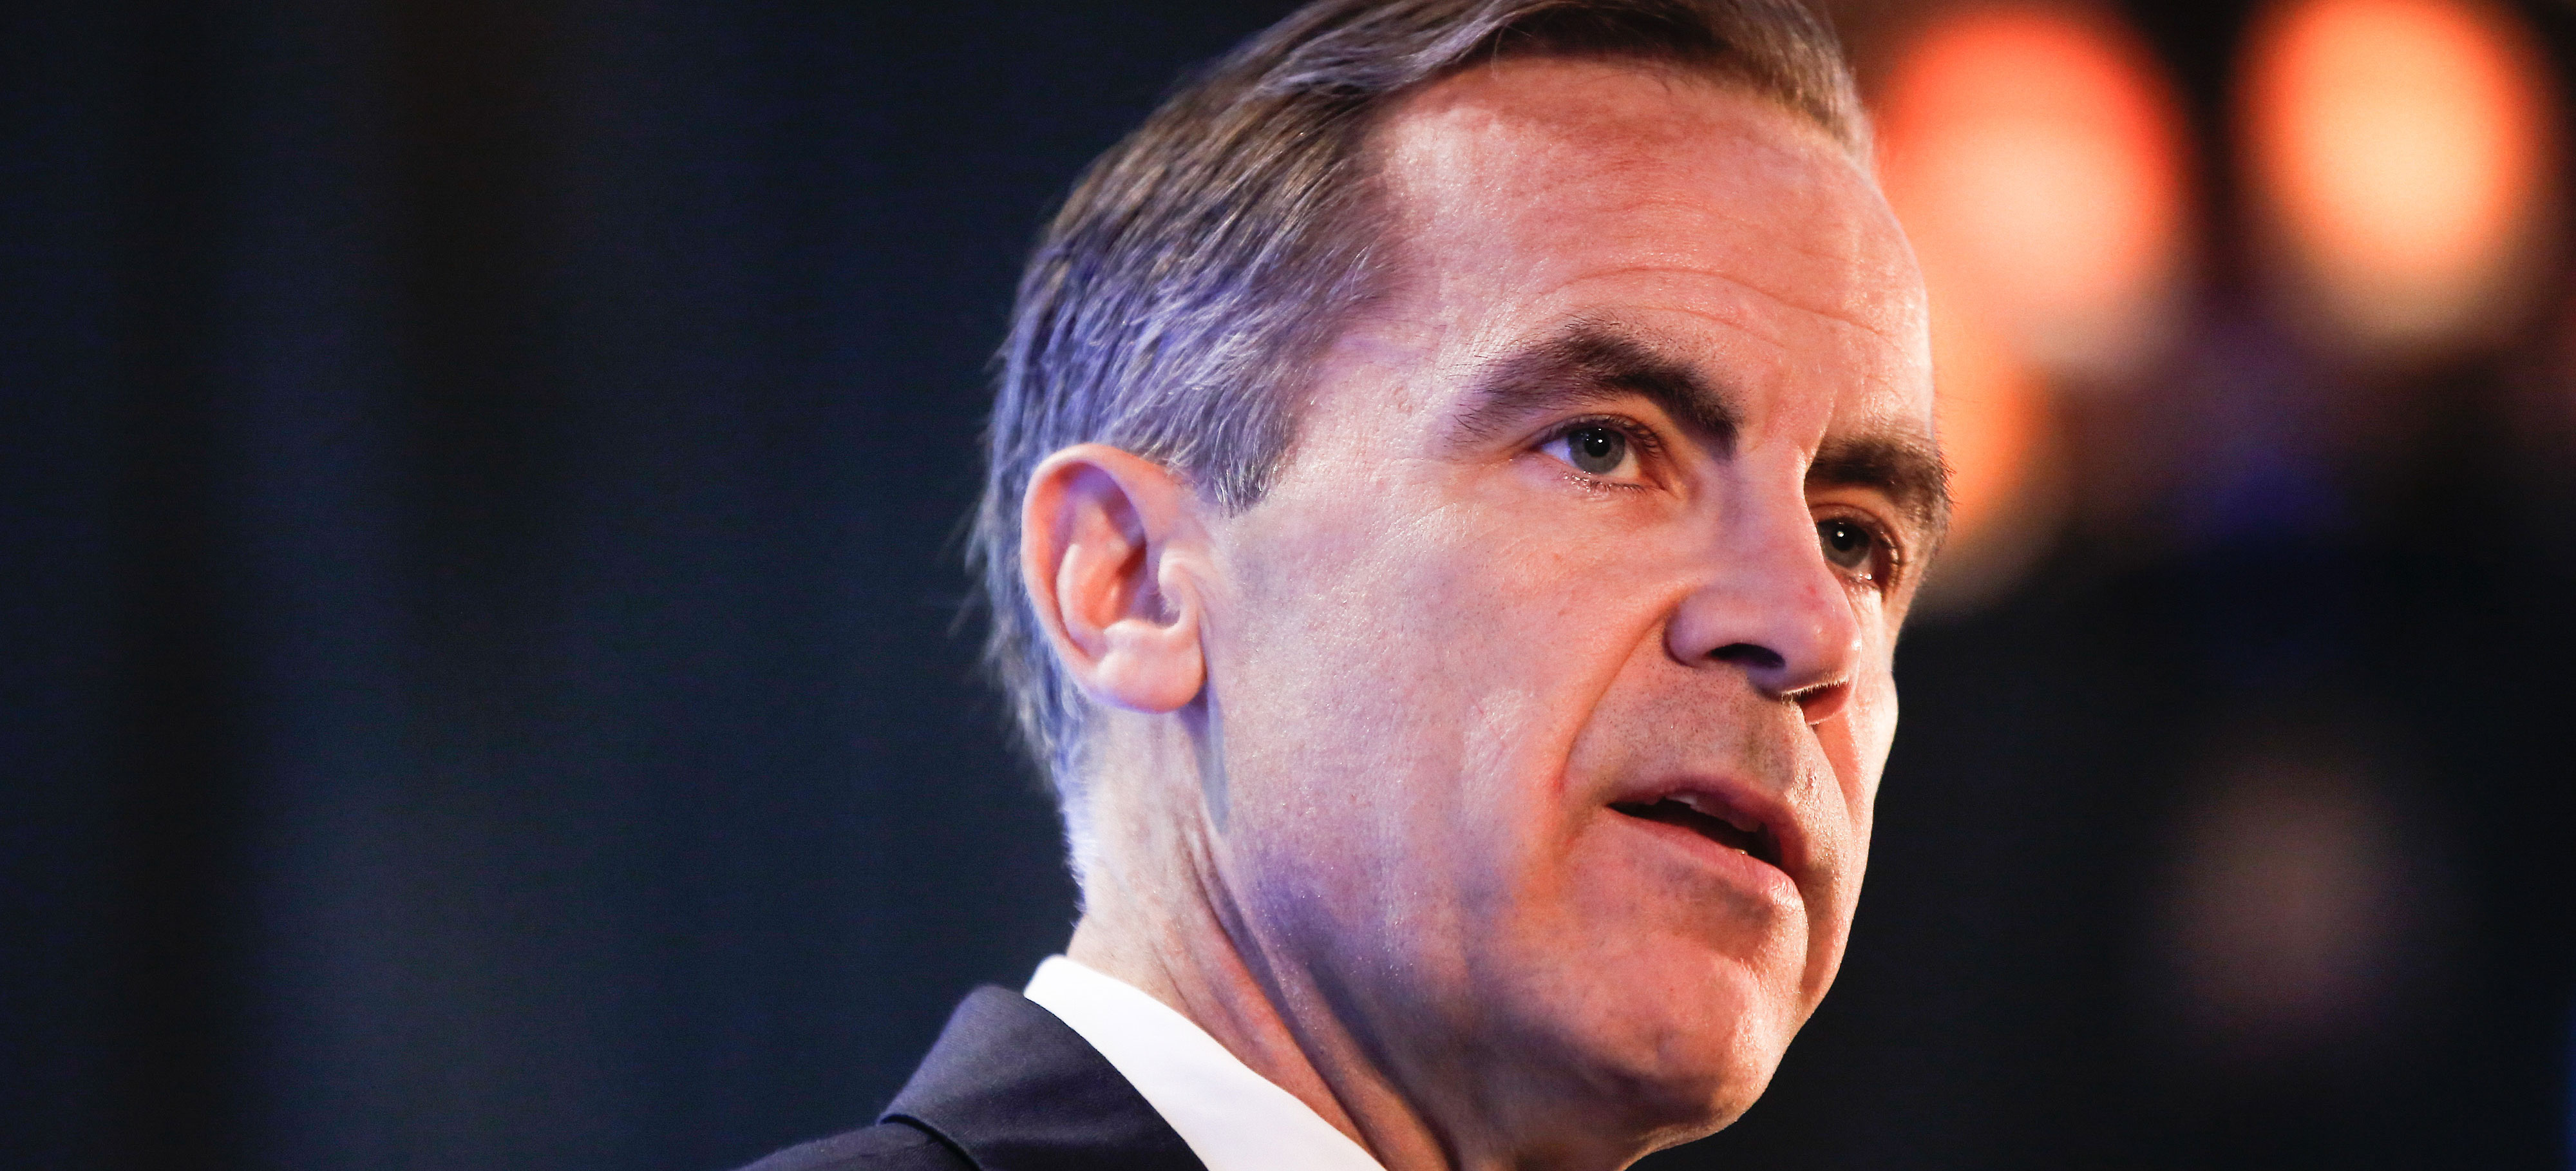 BoE Governor Mark Carney Flags Fintech "Systemic Risks"